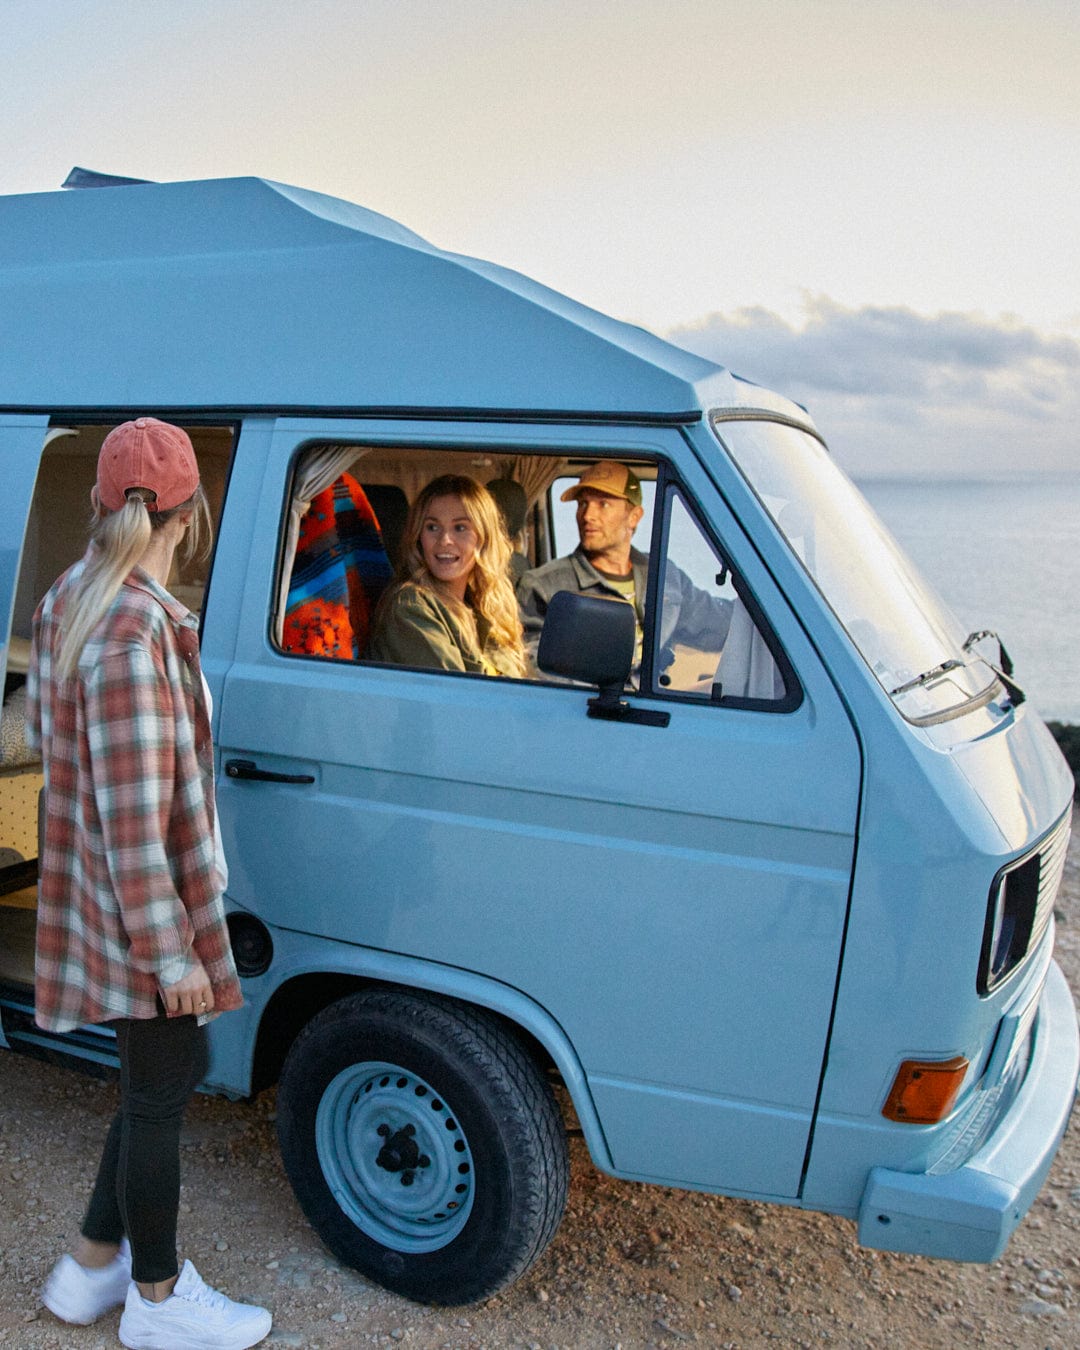 A group of people standing next to a blue VW camper van with a Saltrock Reversible Sherpa Lined Car Seat Cover - Green/Aztec.